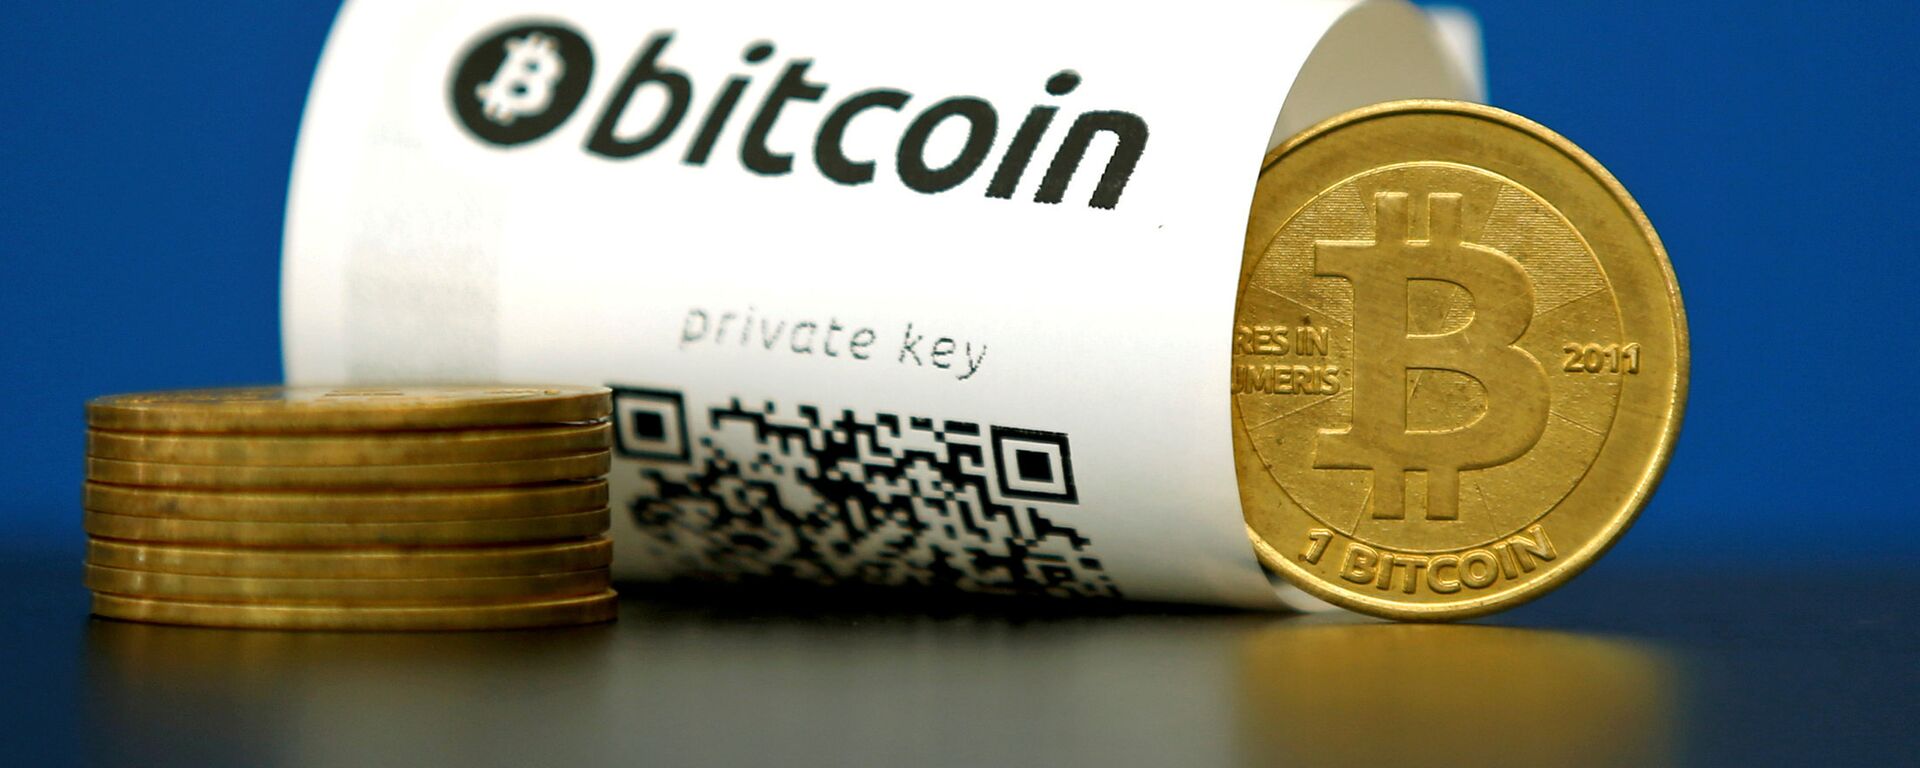 A Bitcoin (virtual currency) paper wallet with QR codes and a coin are seen in an illustration picture taken at La Maison du Bitcoin in Paris, France May 27, 2015 - سبوتنيك عربي, 1920, 05.01.2021